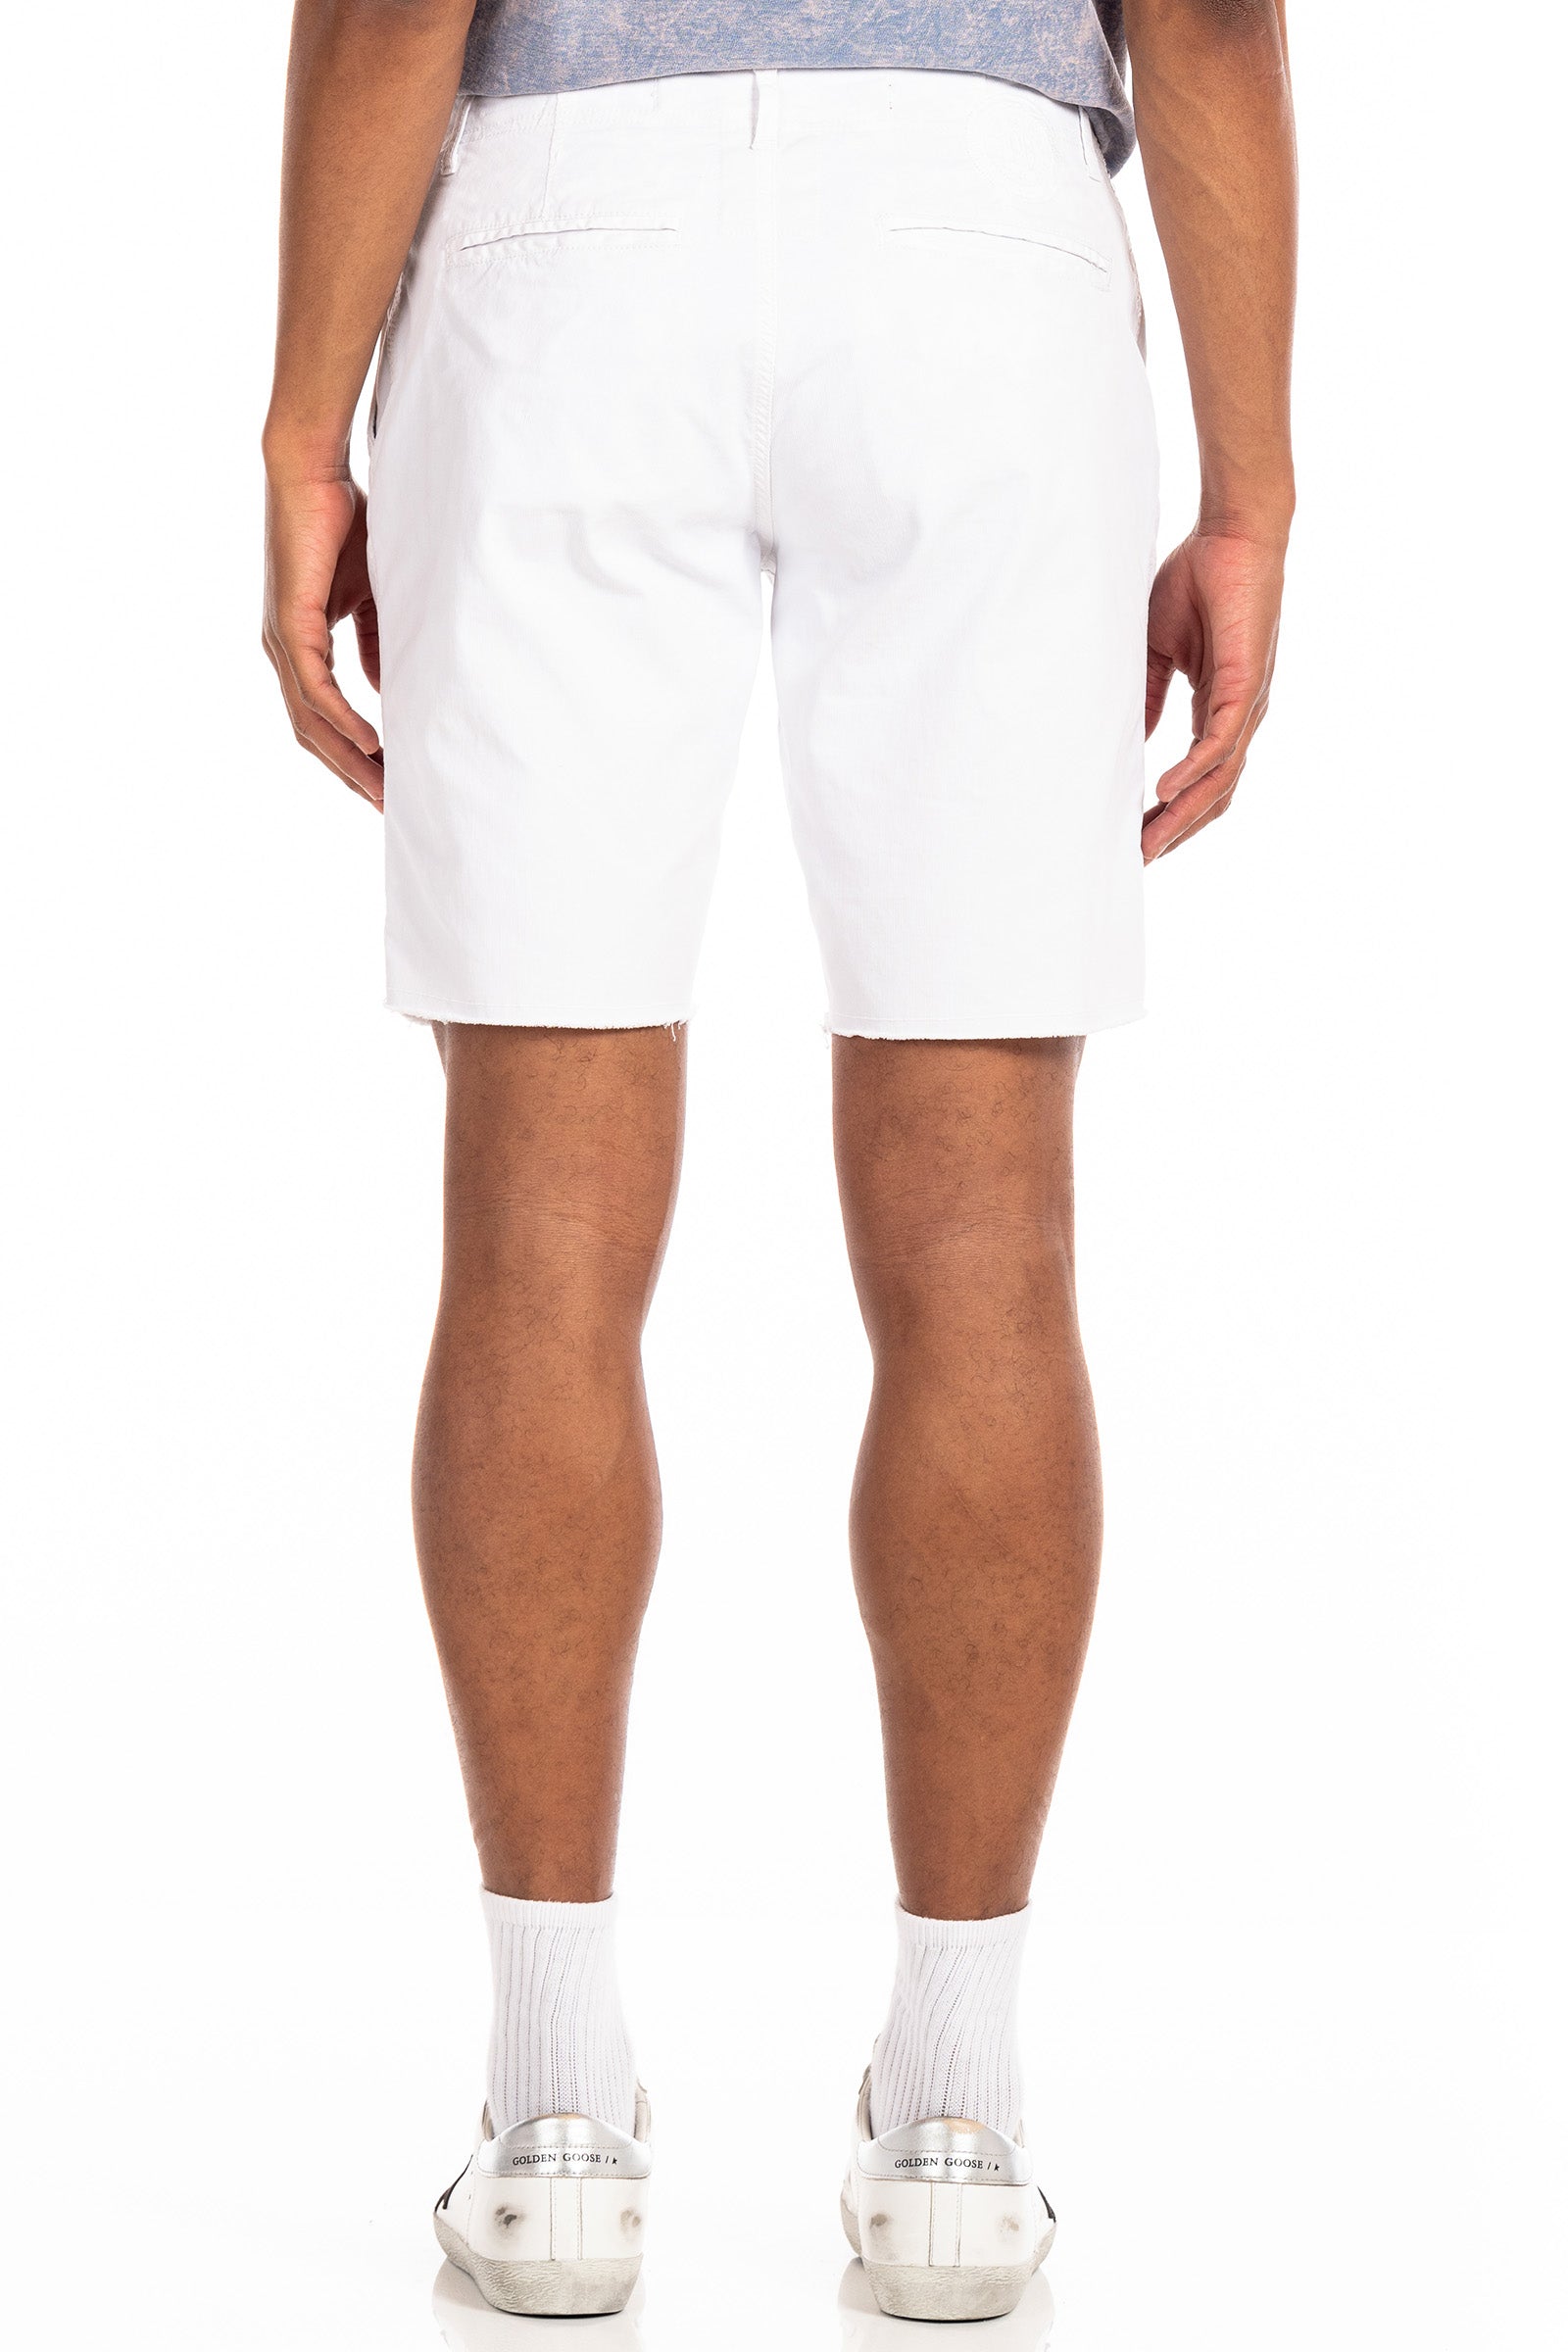 Original Paperbacks Brentwood Chino Short in White on Model Cropped Back View